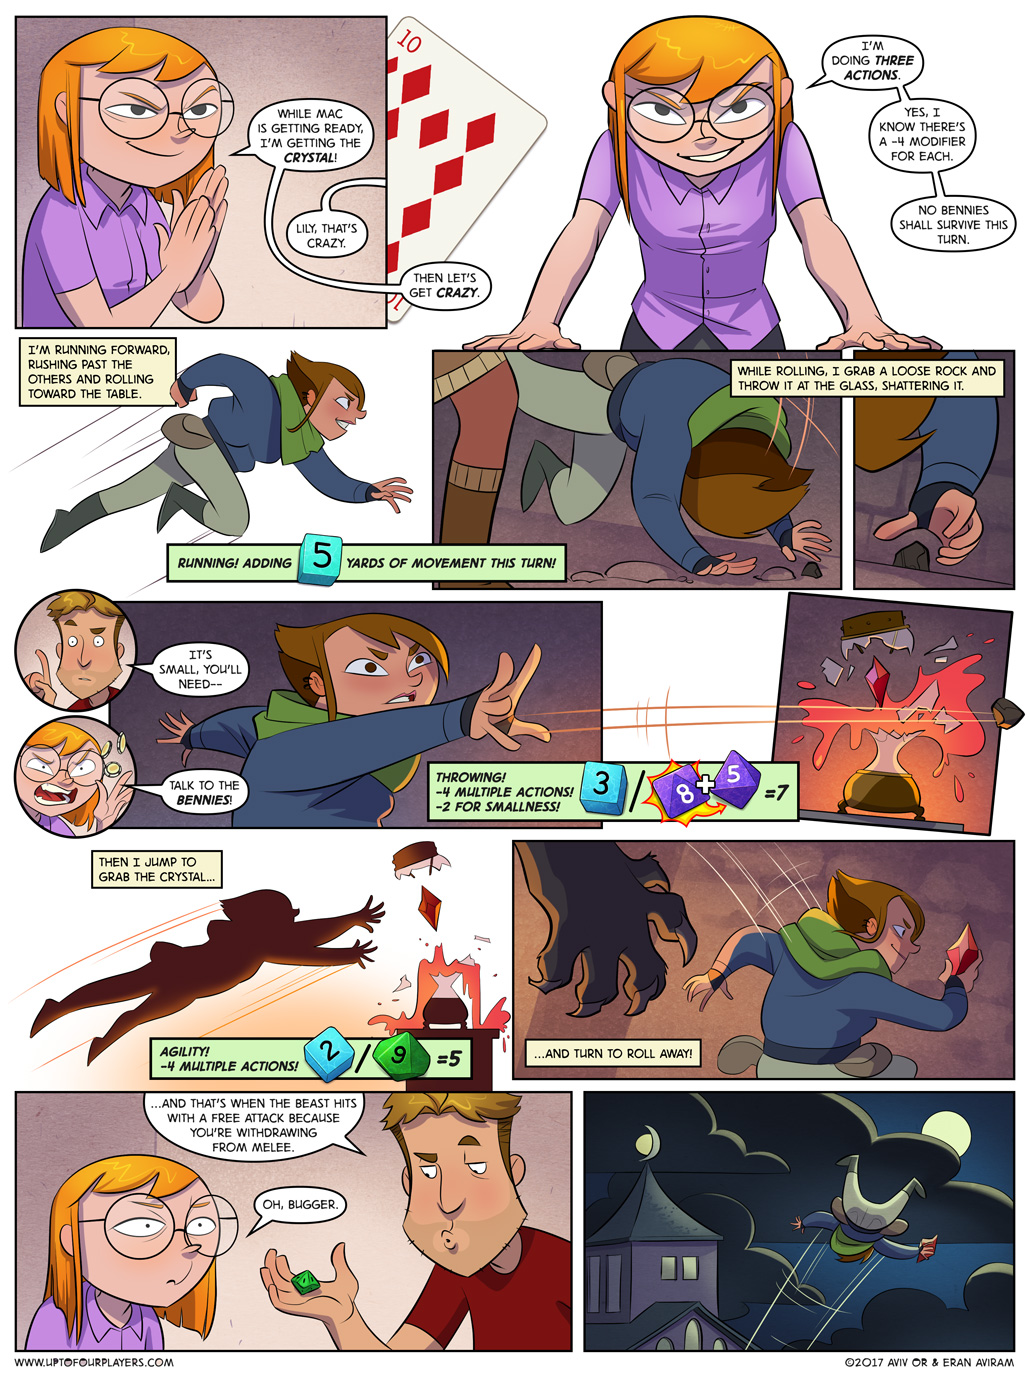 Wild at Heart – Page 19